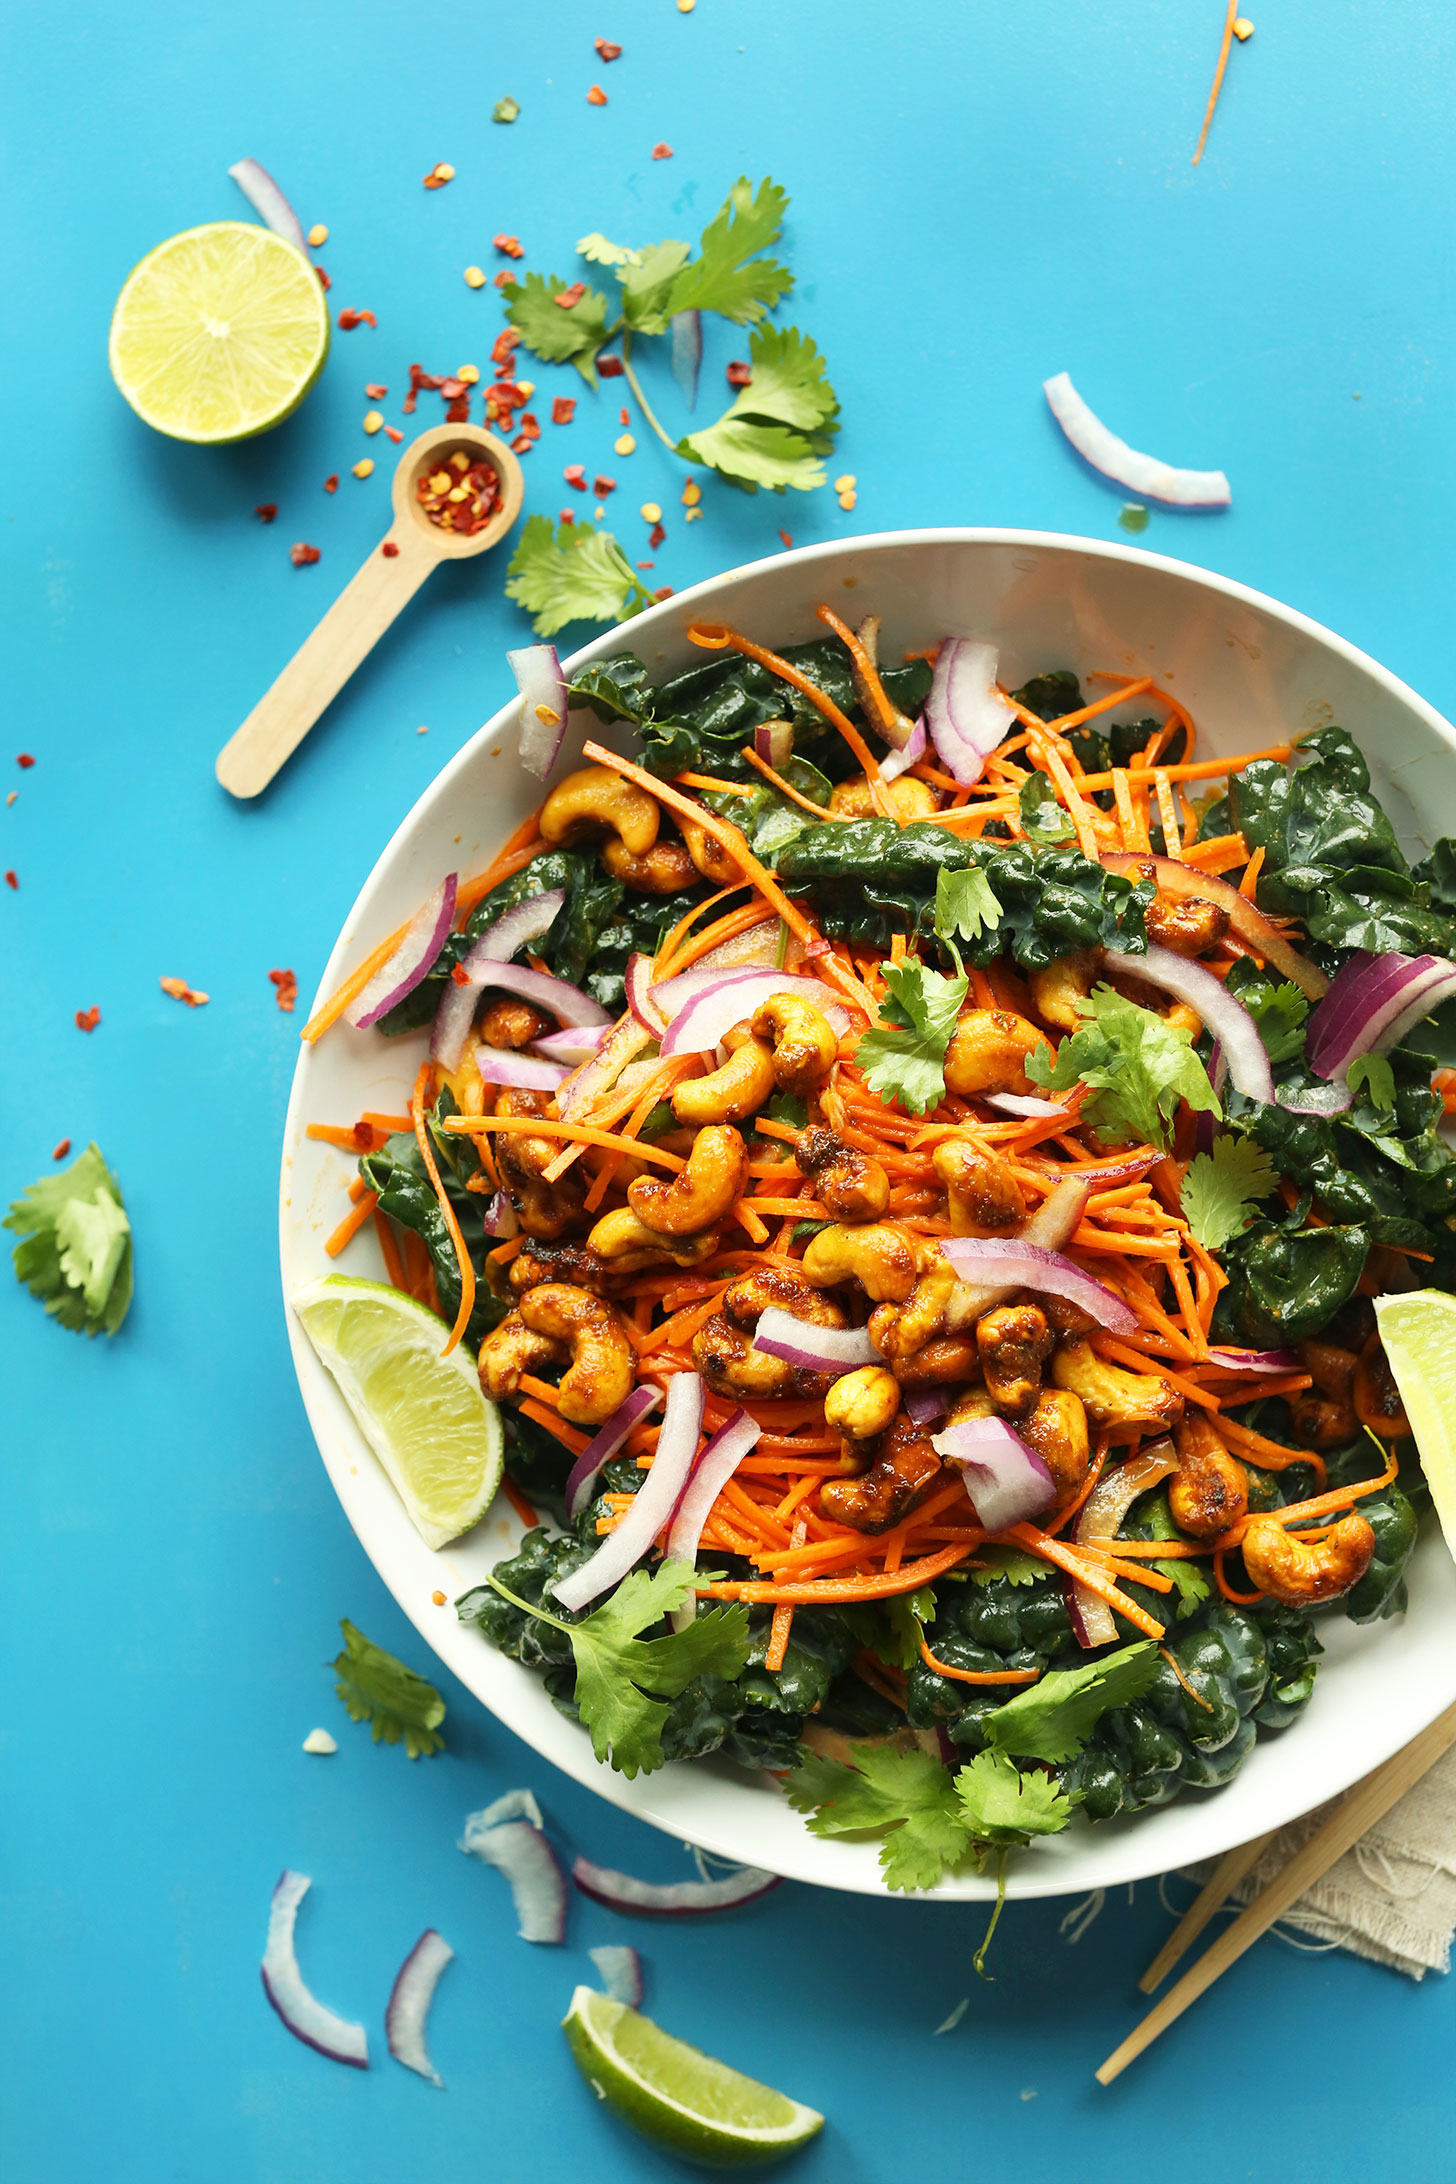 Big Thai Carrot Kale Salad with Curried Cashews for a quick vegan whole meal salad